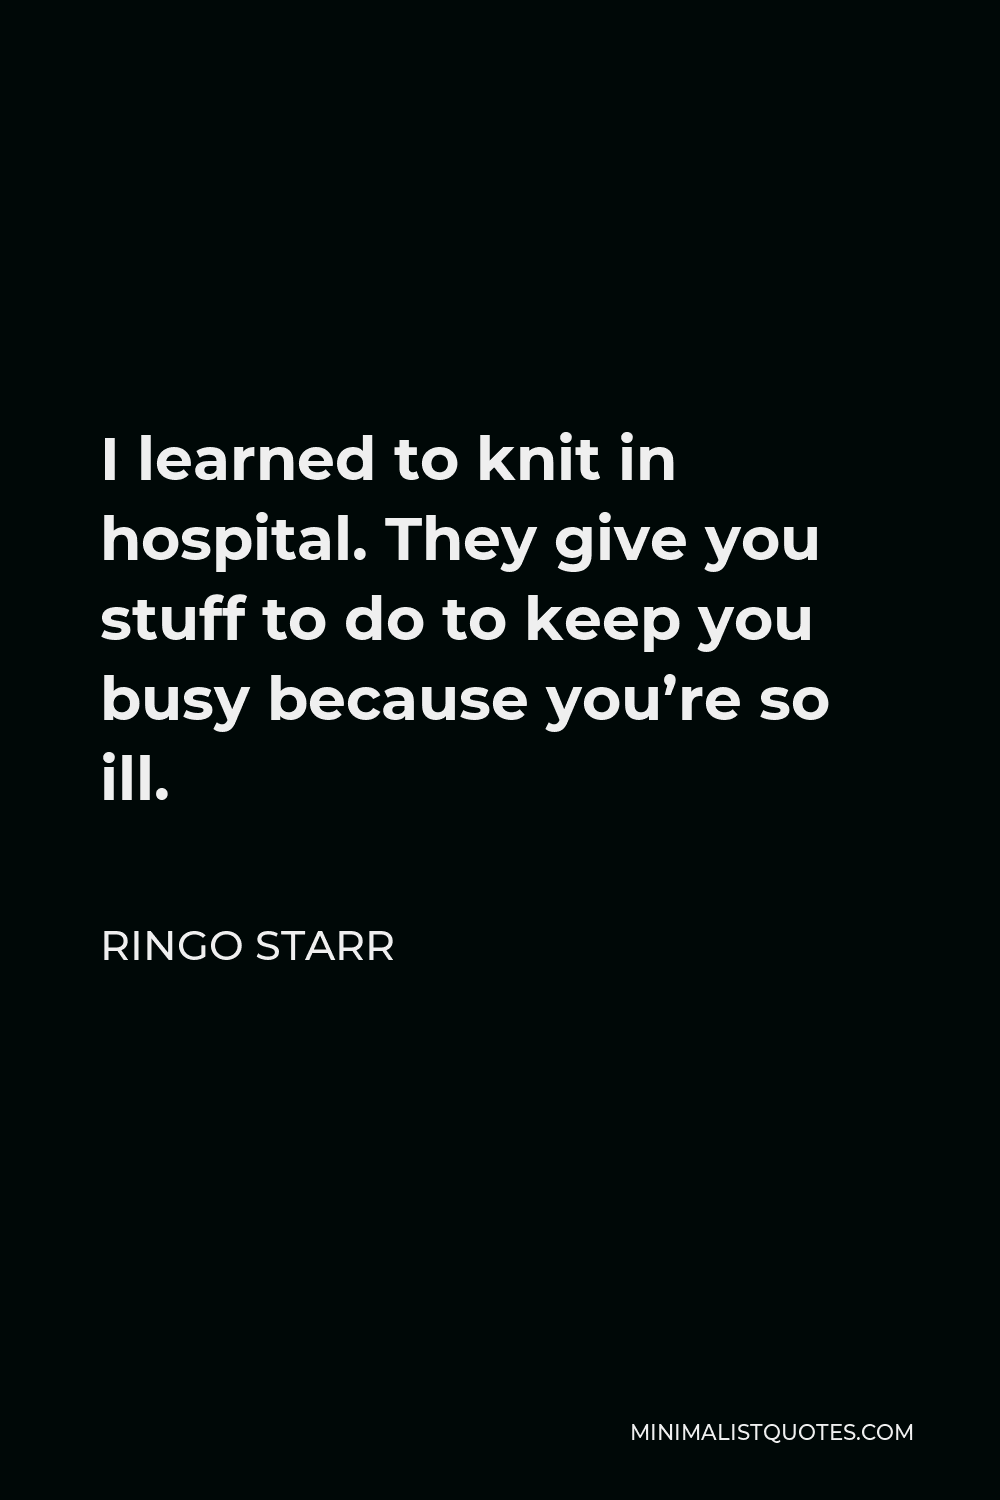 Ringo Starr Quote - I learned to knit in hospital. They give you stuff to do to keep you busy because you’re so ill.